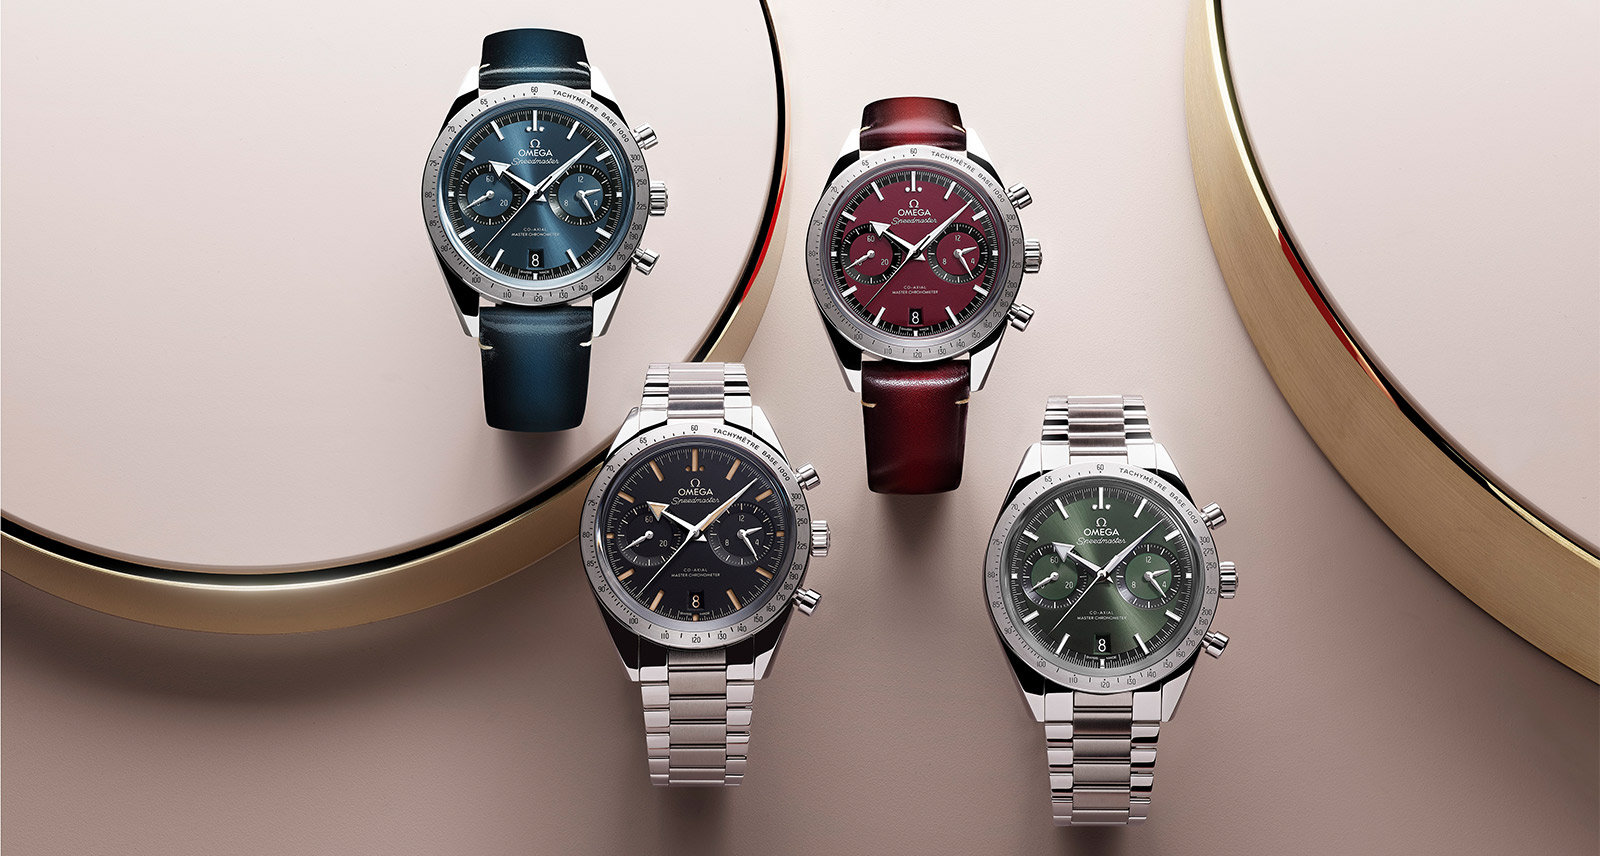 Omega watches feature